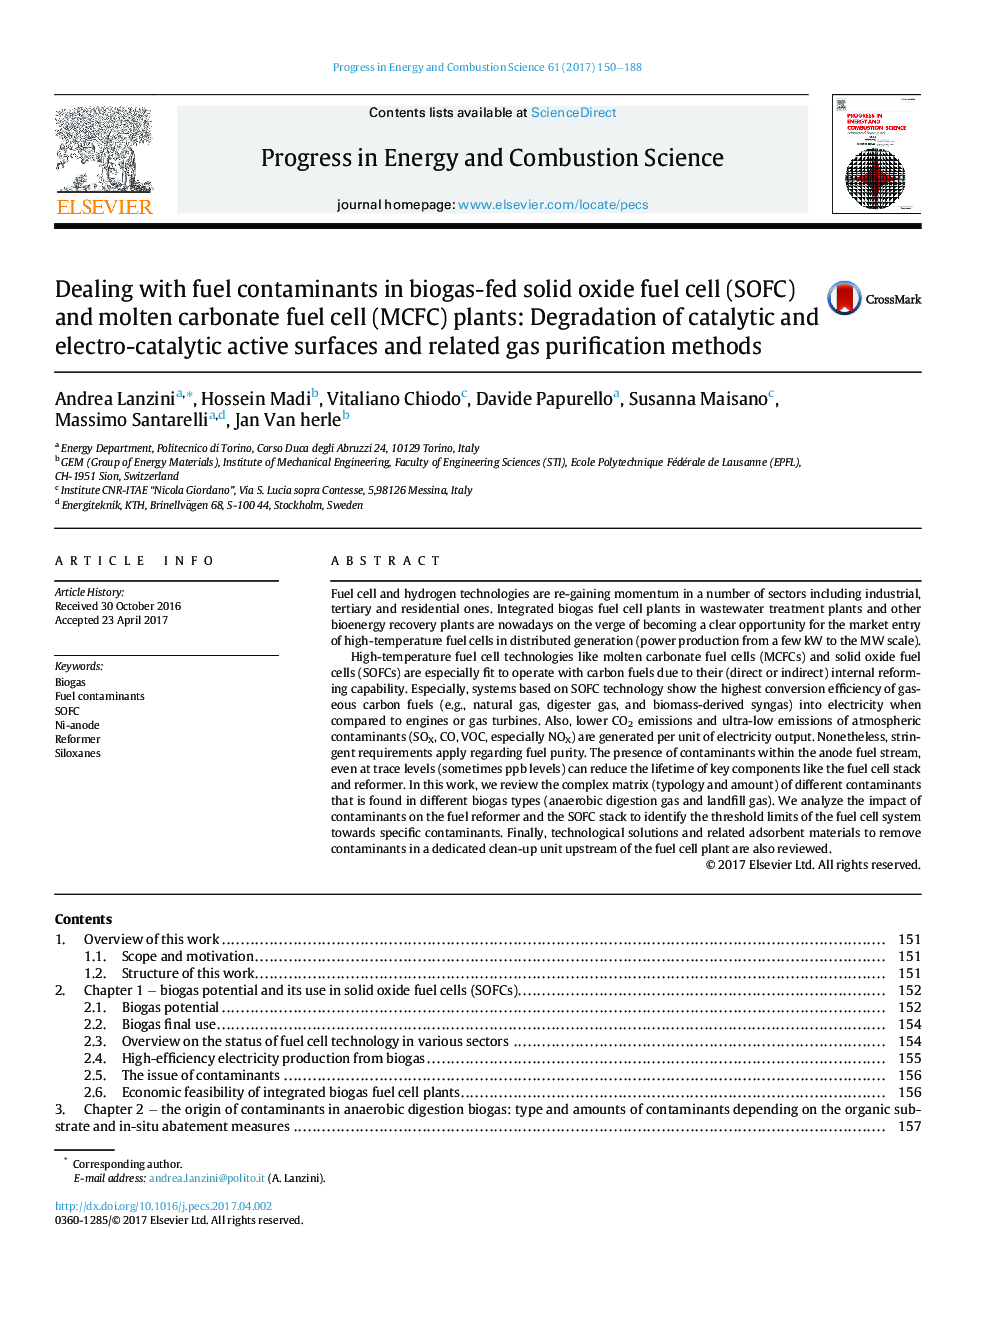 Dealing with fuel contaminants in biogas-fed solid oxide fuel cell (SOFC) and molten carbonate fuel cell (MCFC) plants: Degradation of catalytic and electro-catalytic active surfaces and related gas purification methods